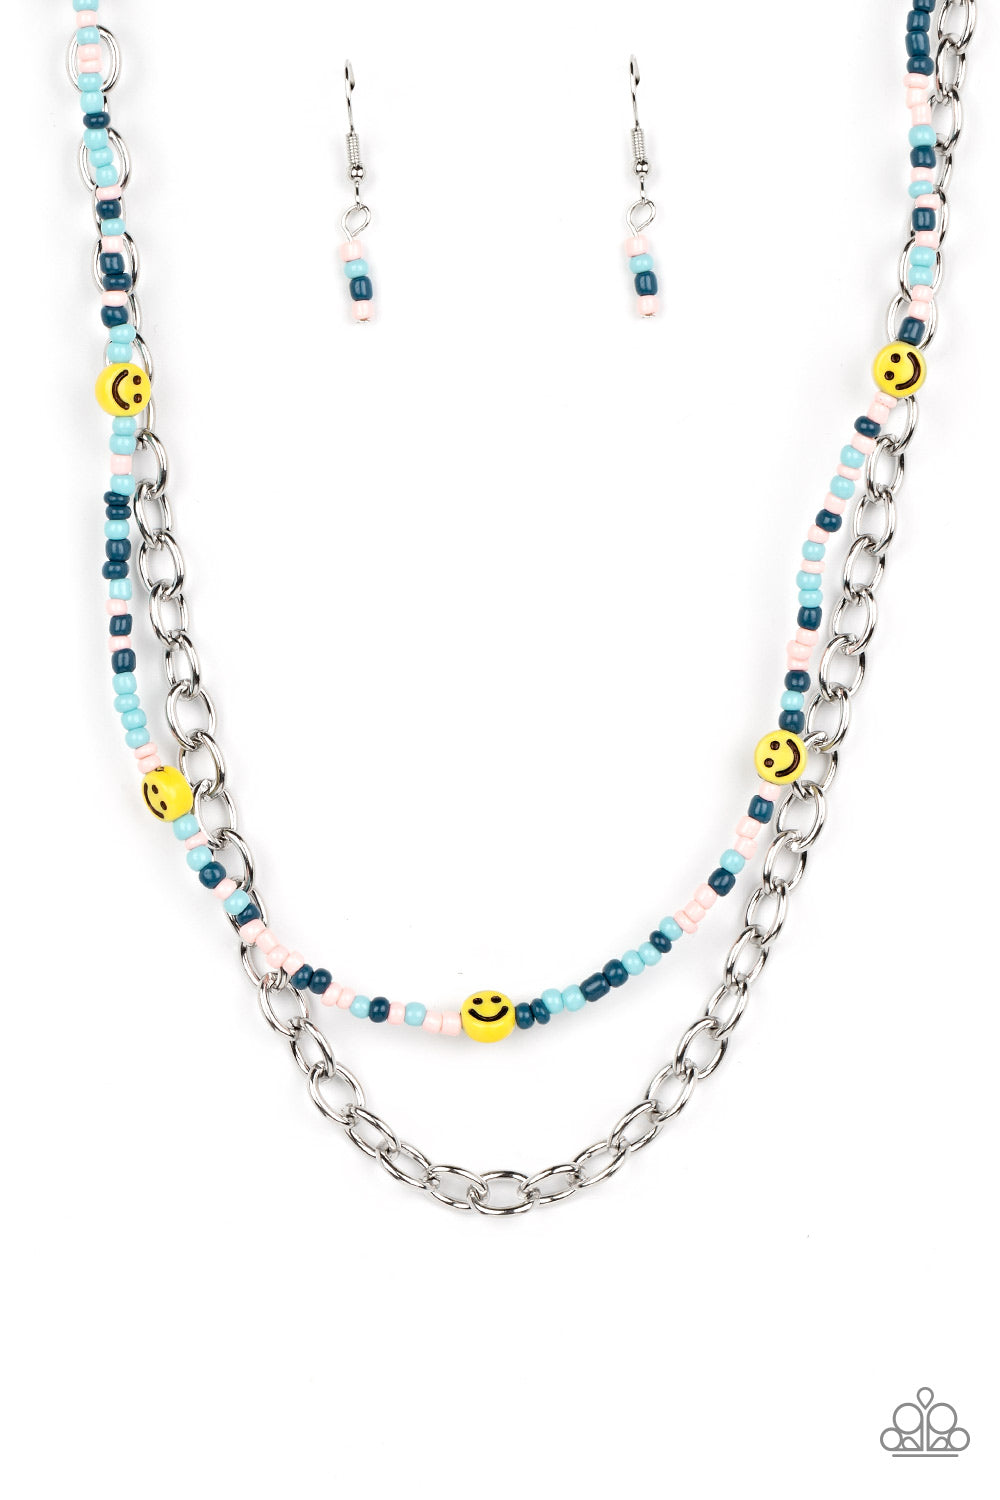 HAPPY LOOKS GOOD ON YOU BLUE-NECKLACE